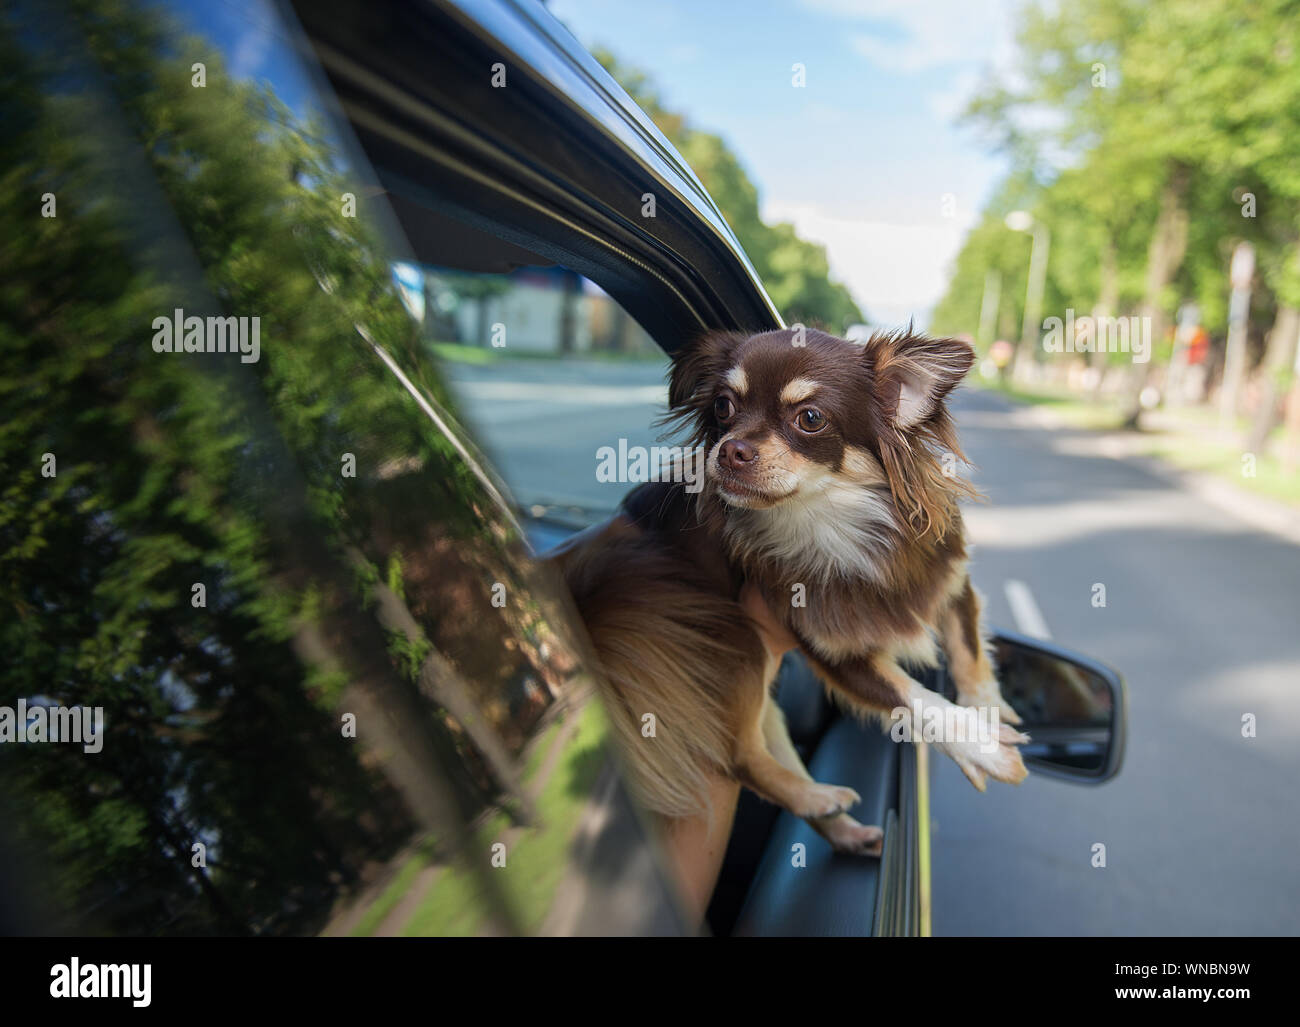 Chihuahua Looking Out Through Car Window Stock Photo - Alamy